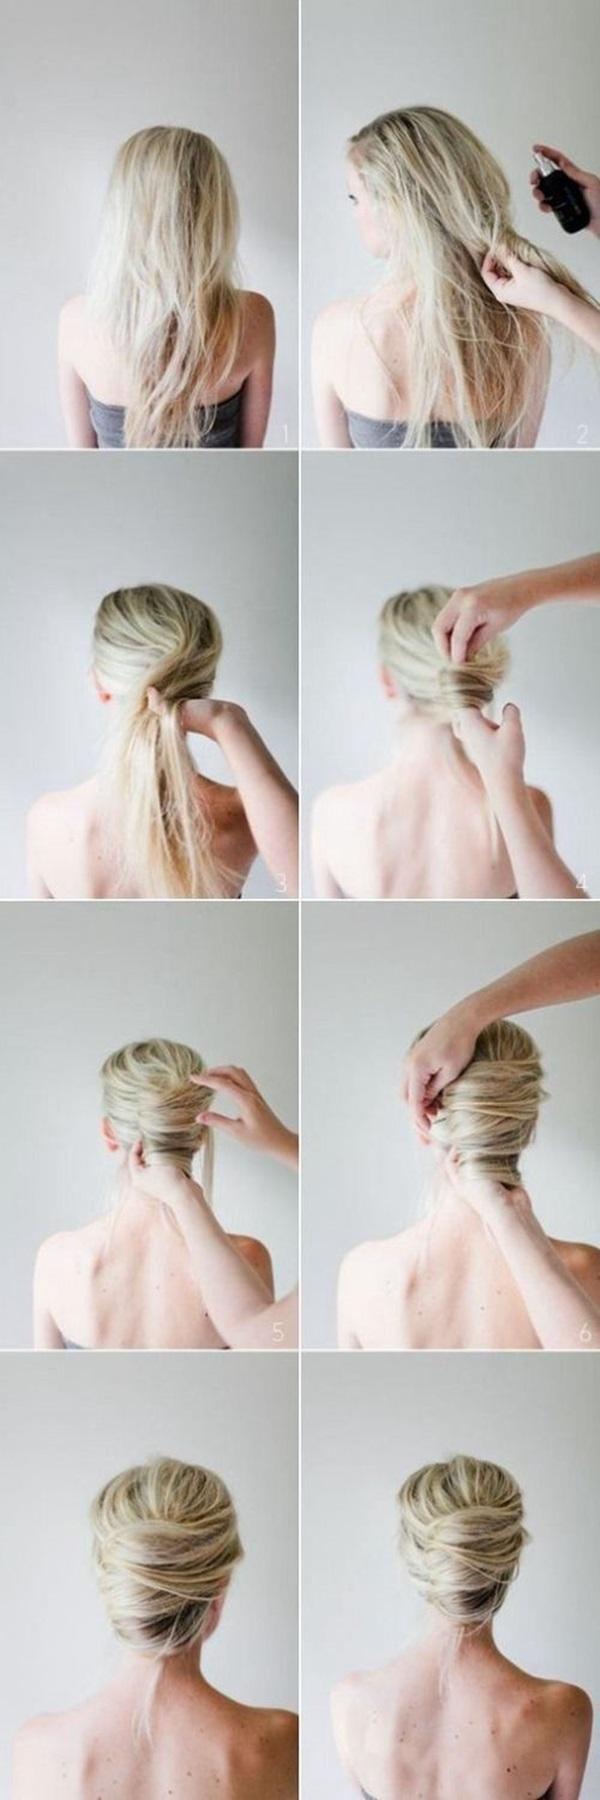 Wedding - 35 DIY Hairstyle Tutorials With Pictures 